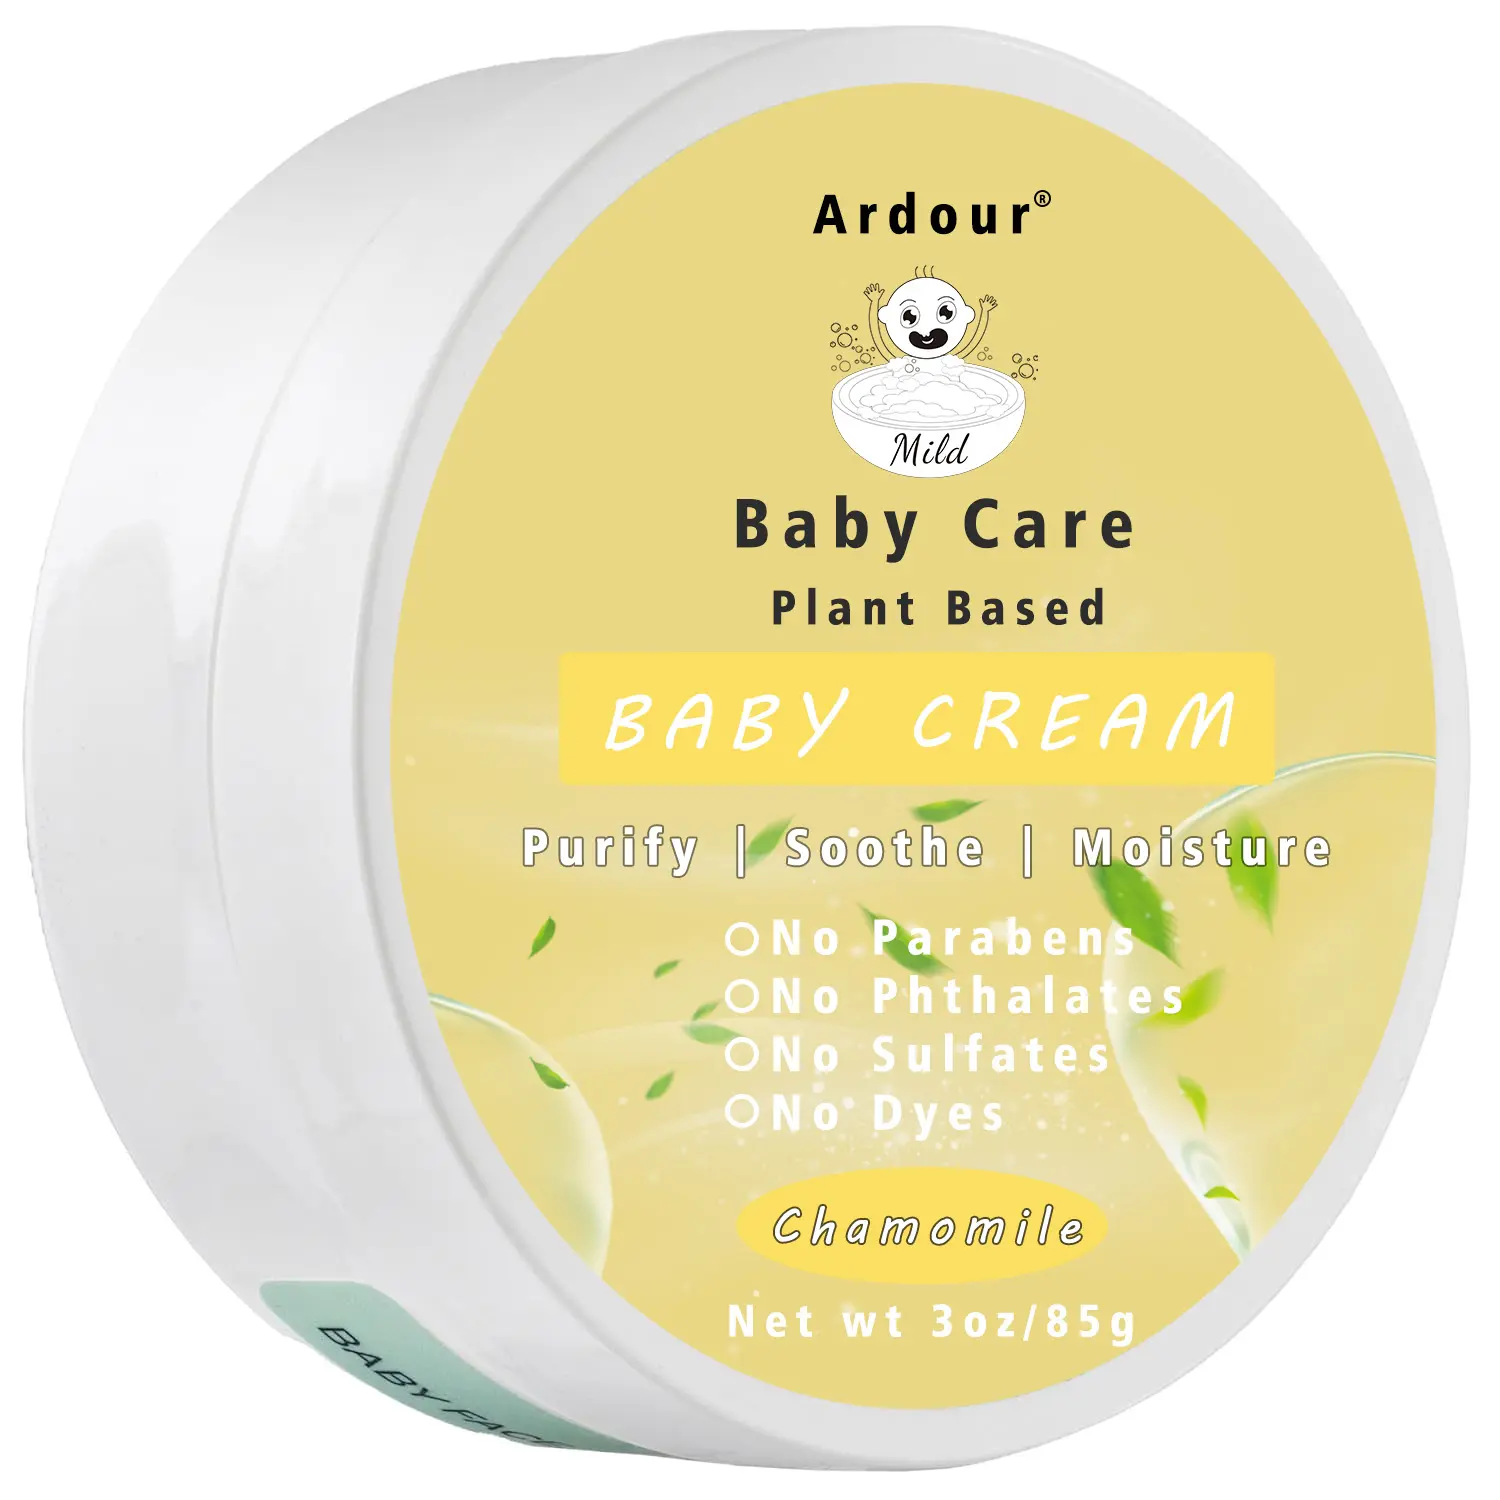 Chamomile Baby Cream Lotion For Babies Kids Children Newborn Infants Gentle For Baby Body And Face Skin Care Butter Balm